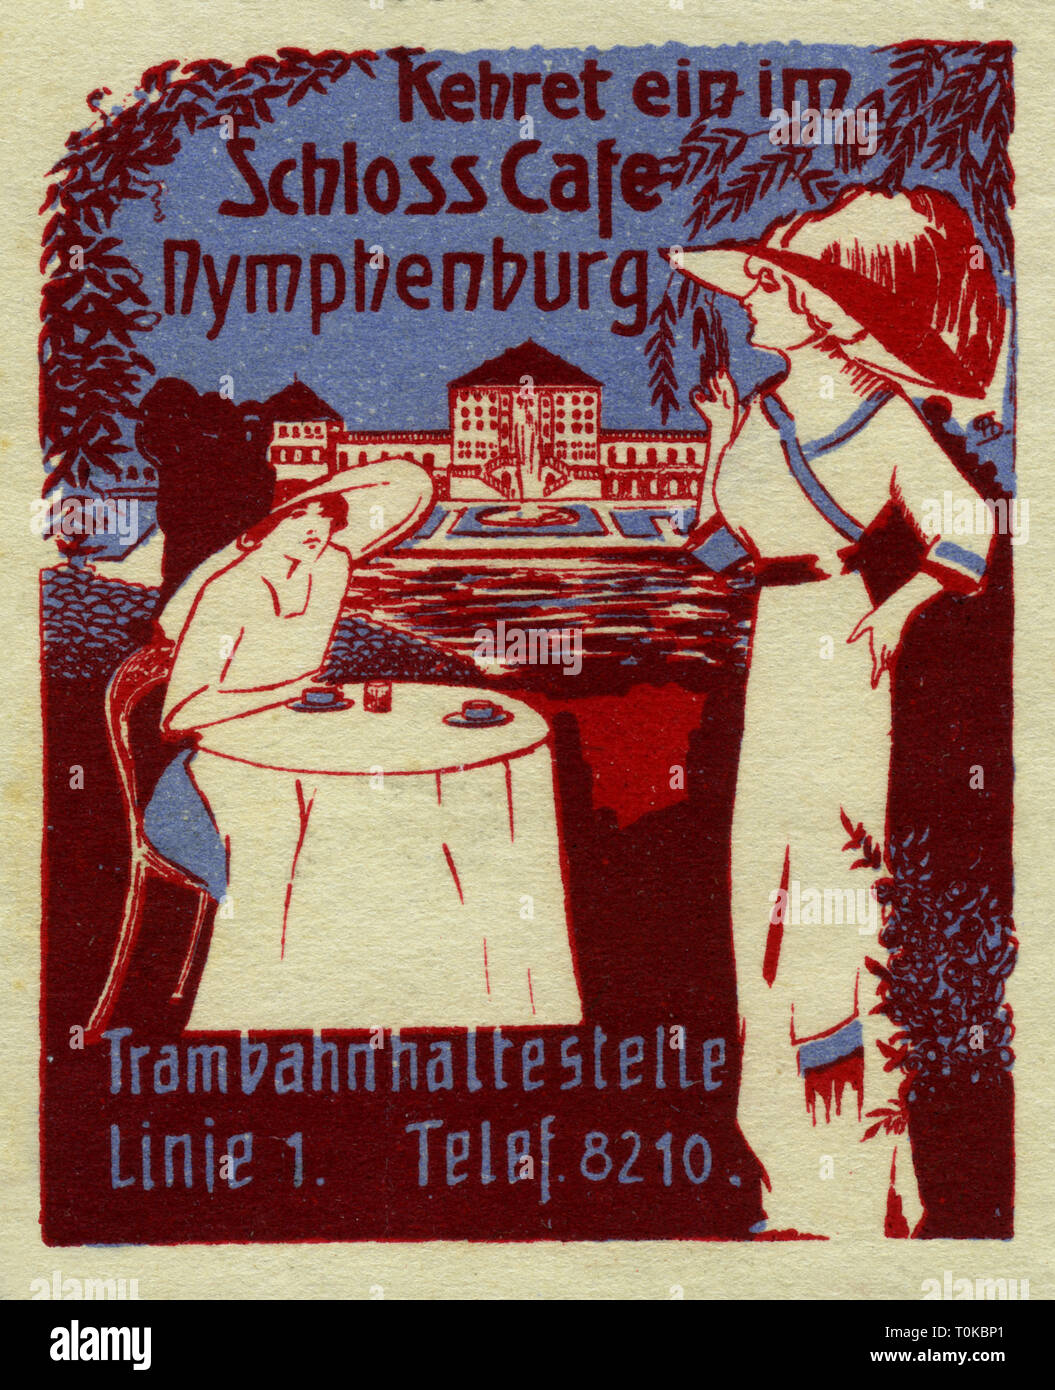 gastronomy, 'Kehret ein im Schlosscafe Nymphenburg', poster stamp, cafe Nymphenburg Palace, two elegant ladies, Munich, Germany, circa 1912, Additional-Rights-Clearance-Info-Not-Available Stock Photo